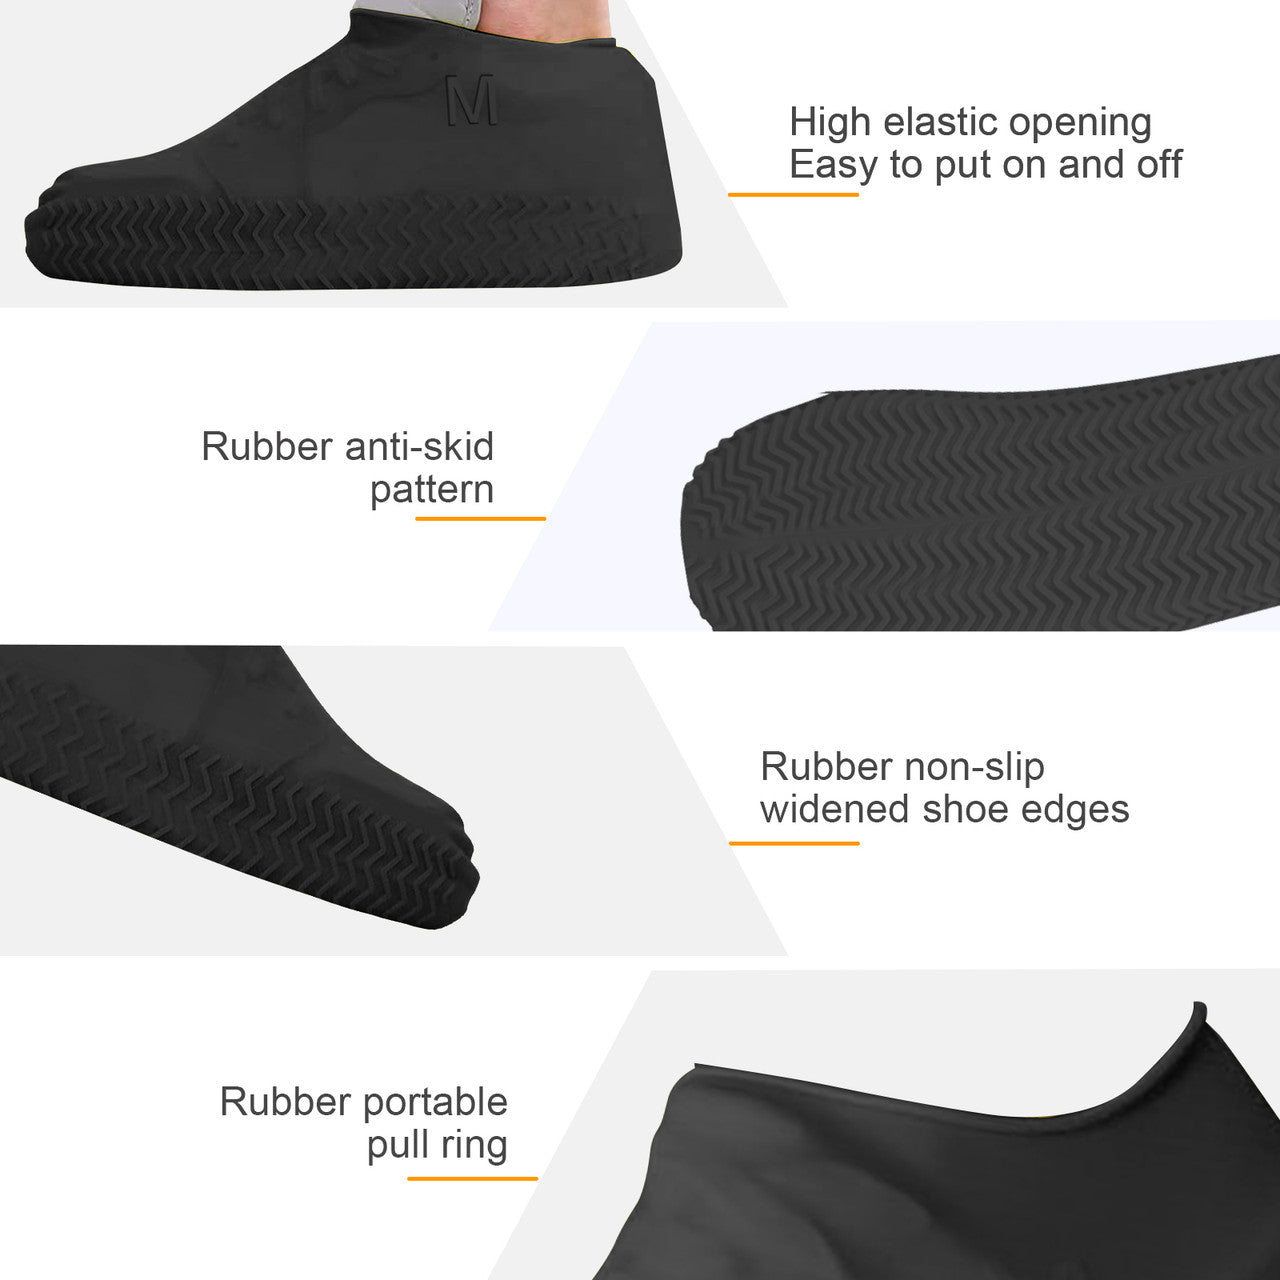 Waterproof Silicone Rain Shoe Cover - Non Slip,Water Resistant,Reusable,Stretchable,Foldable Size XL (Black)